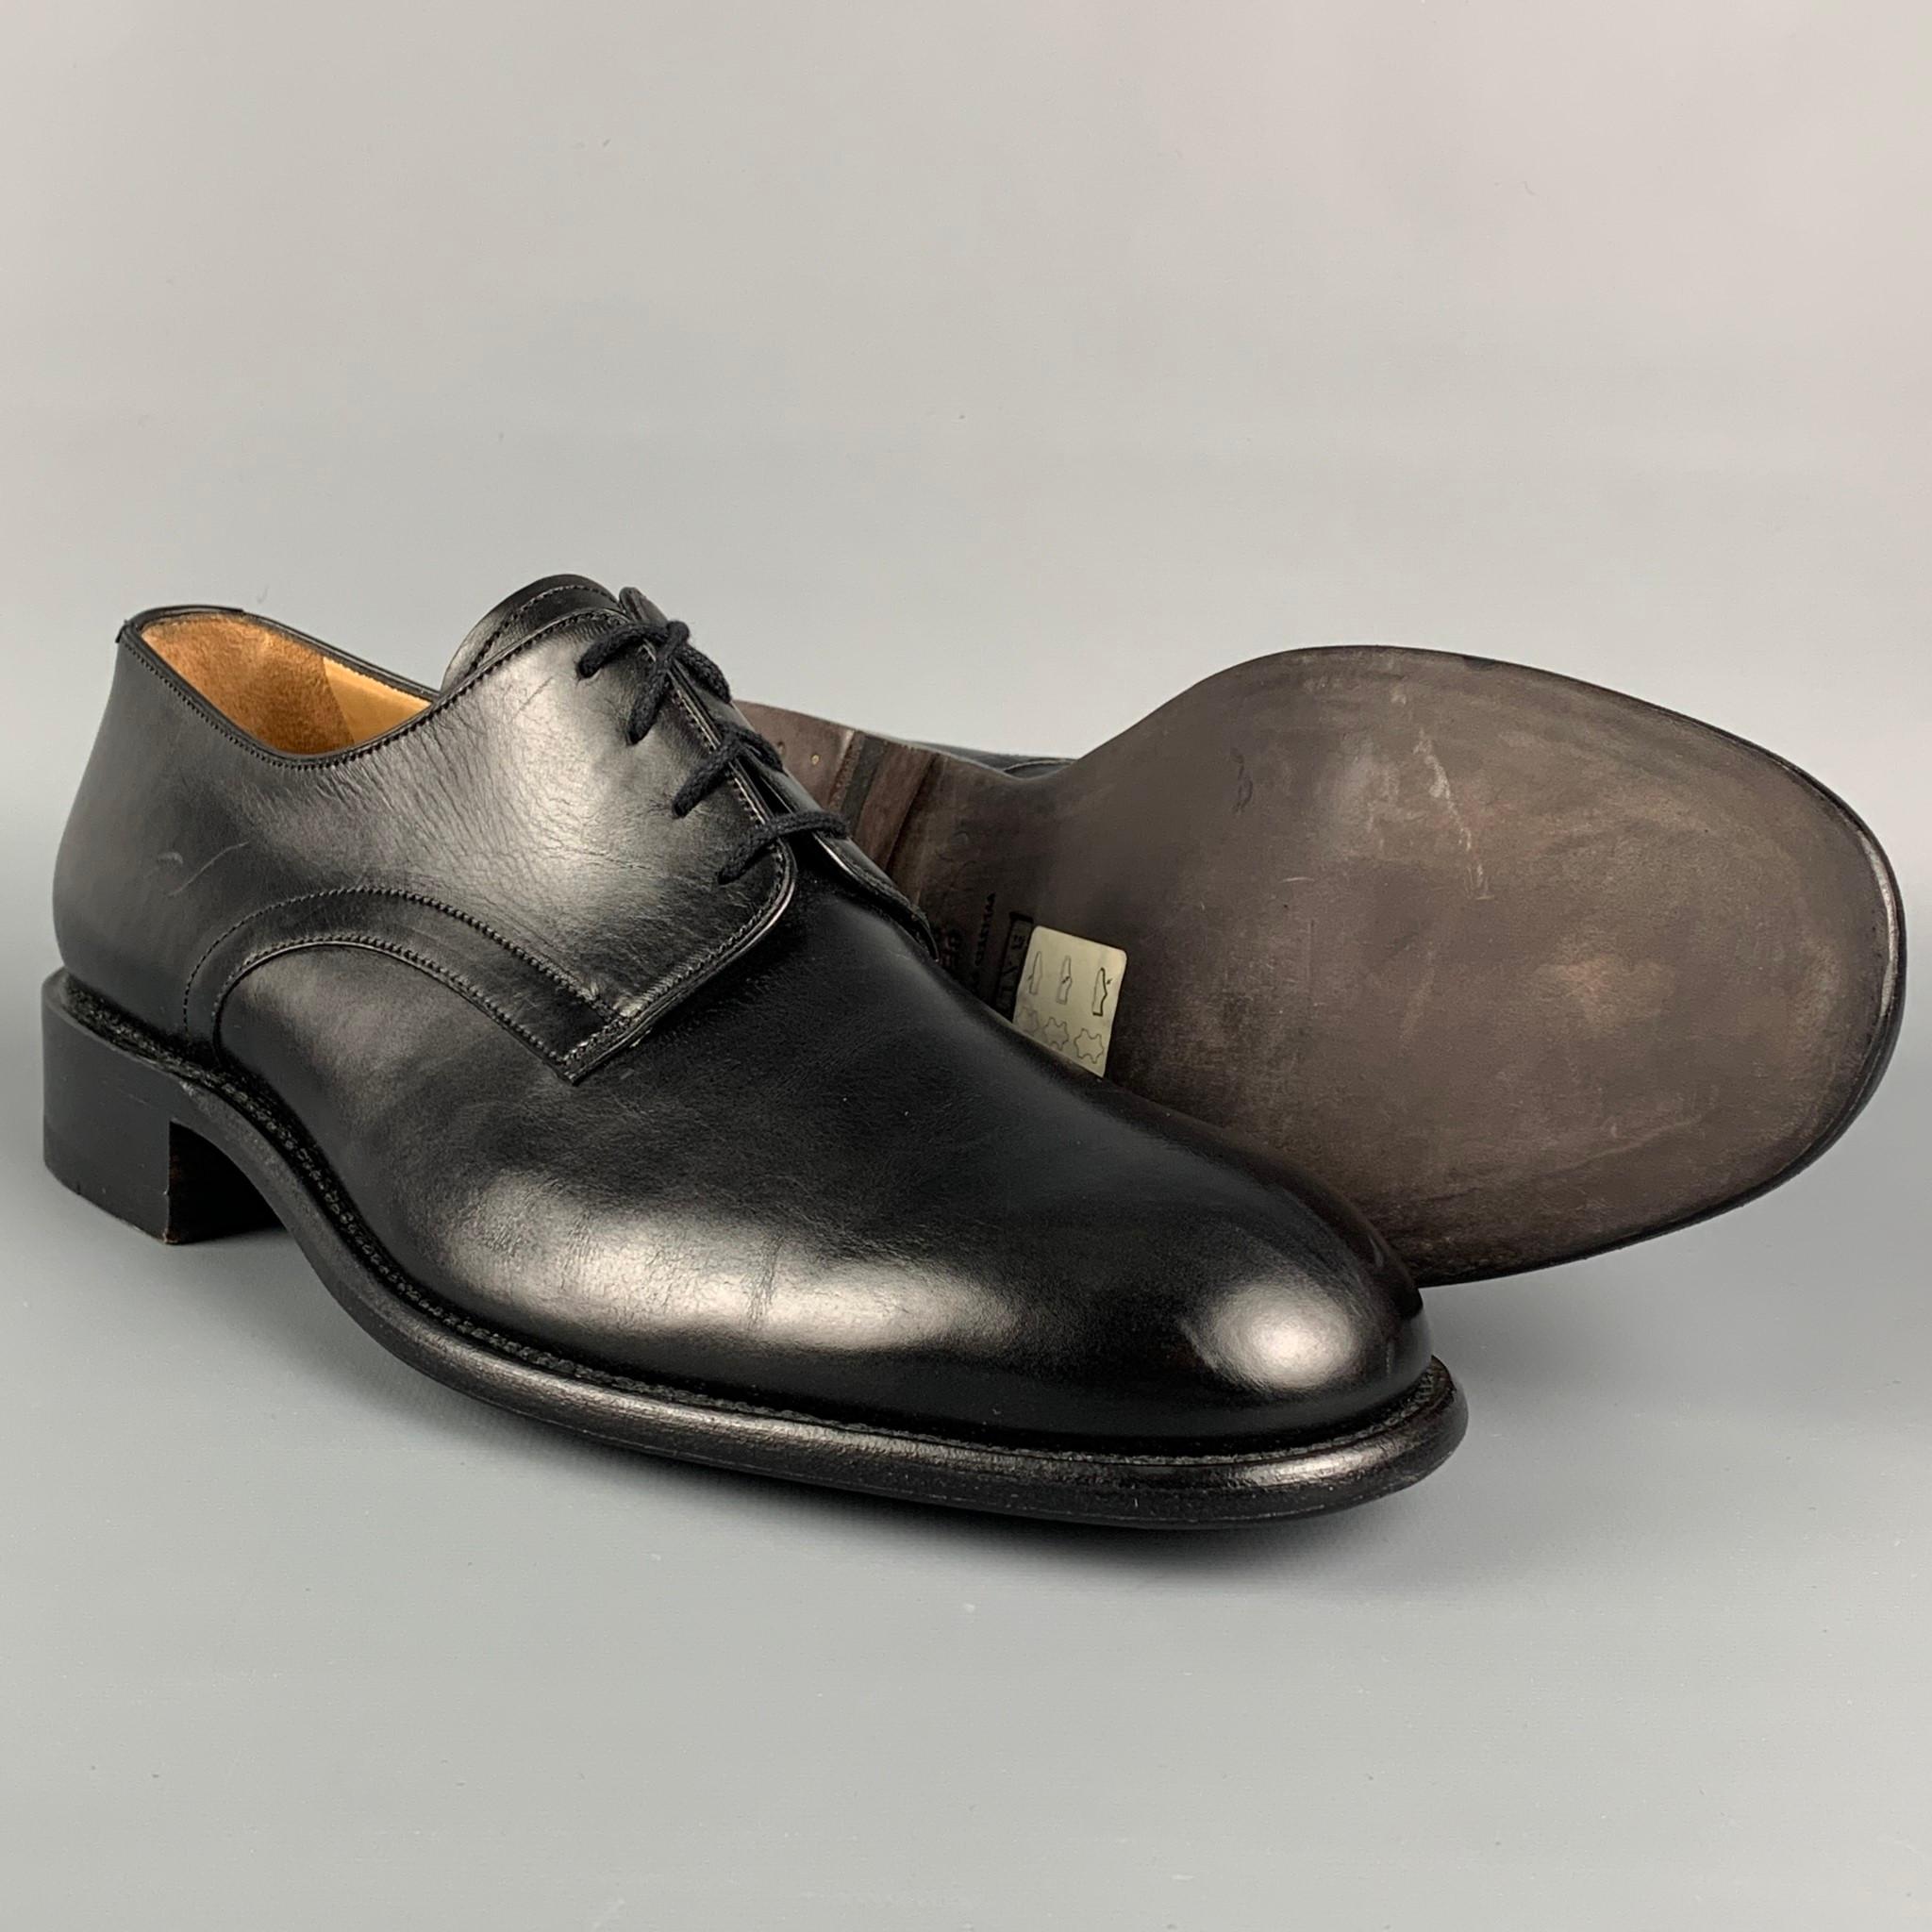 BALLY dress shoes comes in a black leather featuring a classic style and a lace up closure. Shoe trees included.

New With Box. 
Marked: US 9 / EU 8

Outsole: 11.5 in. x 4.25 in. 